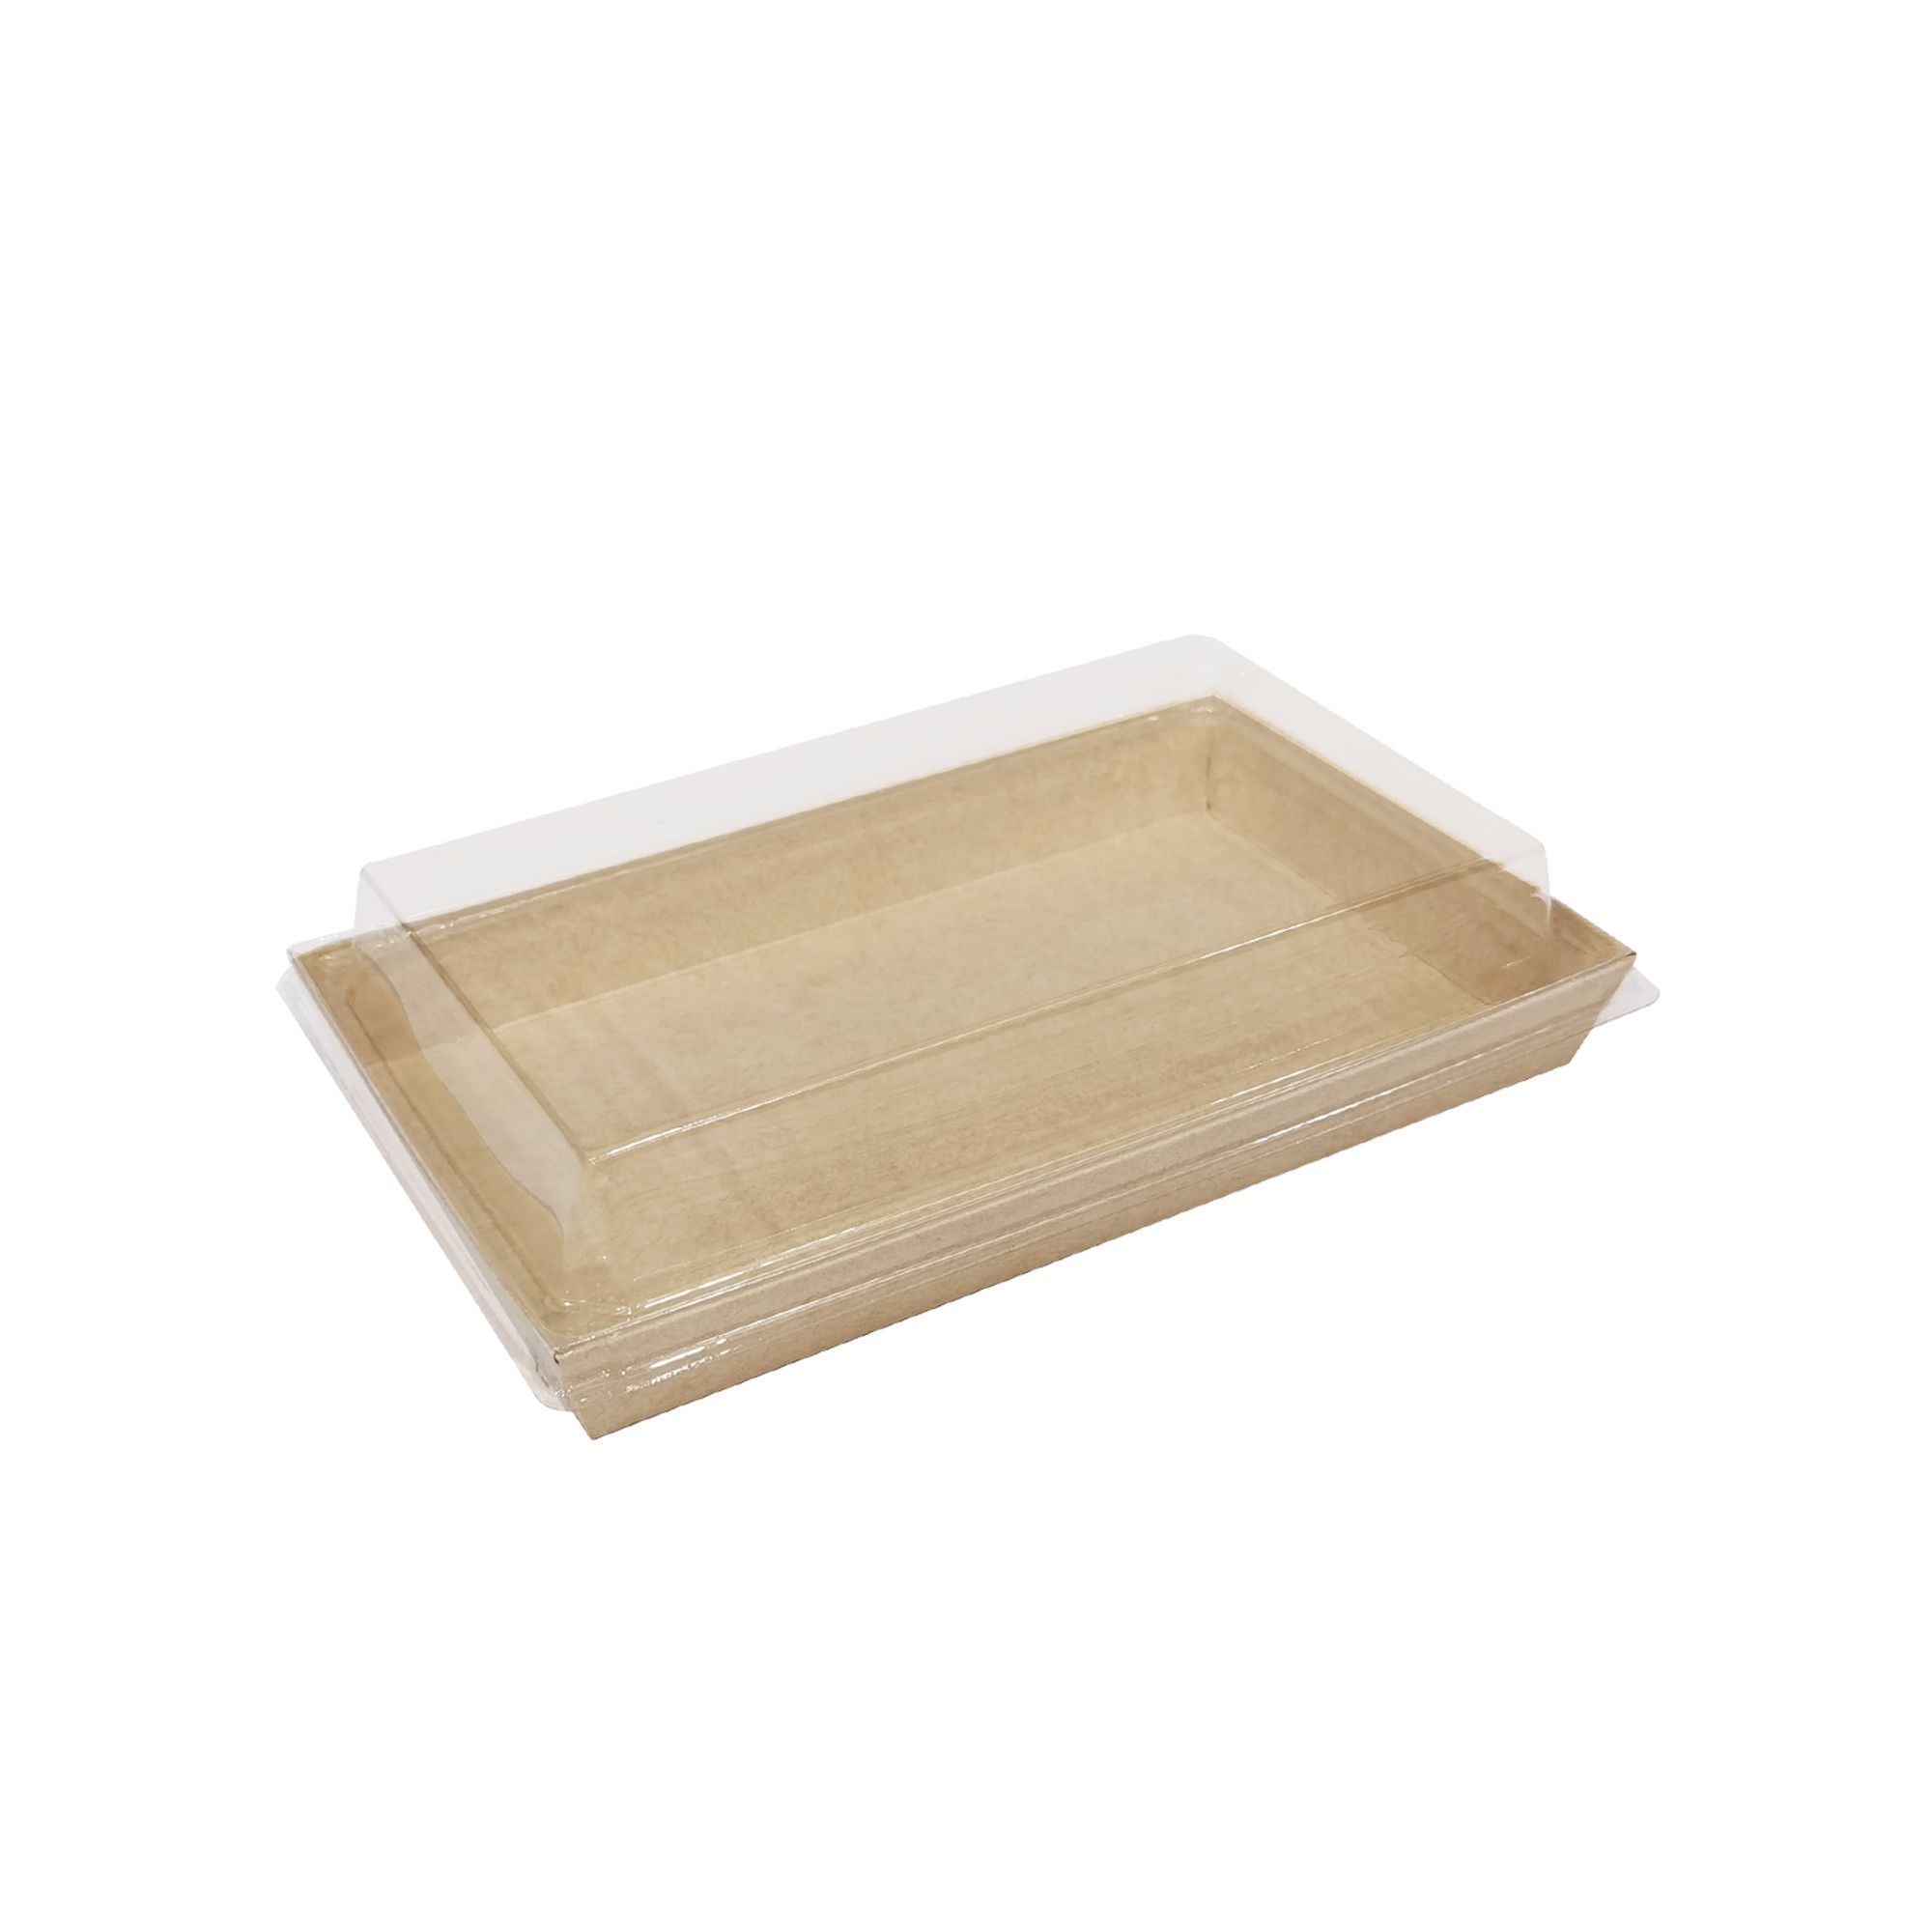 RTO-25 Sushi Tray with Acetate lid